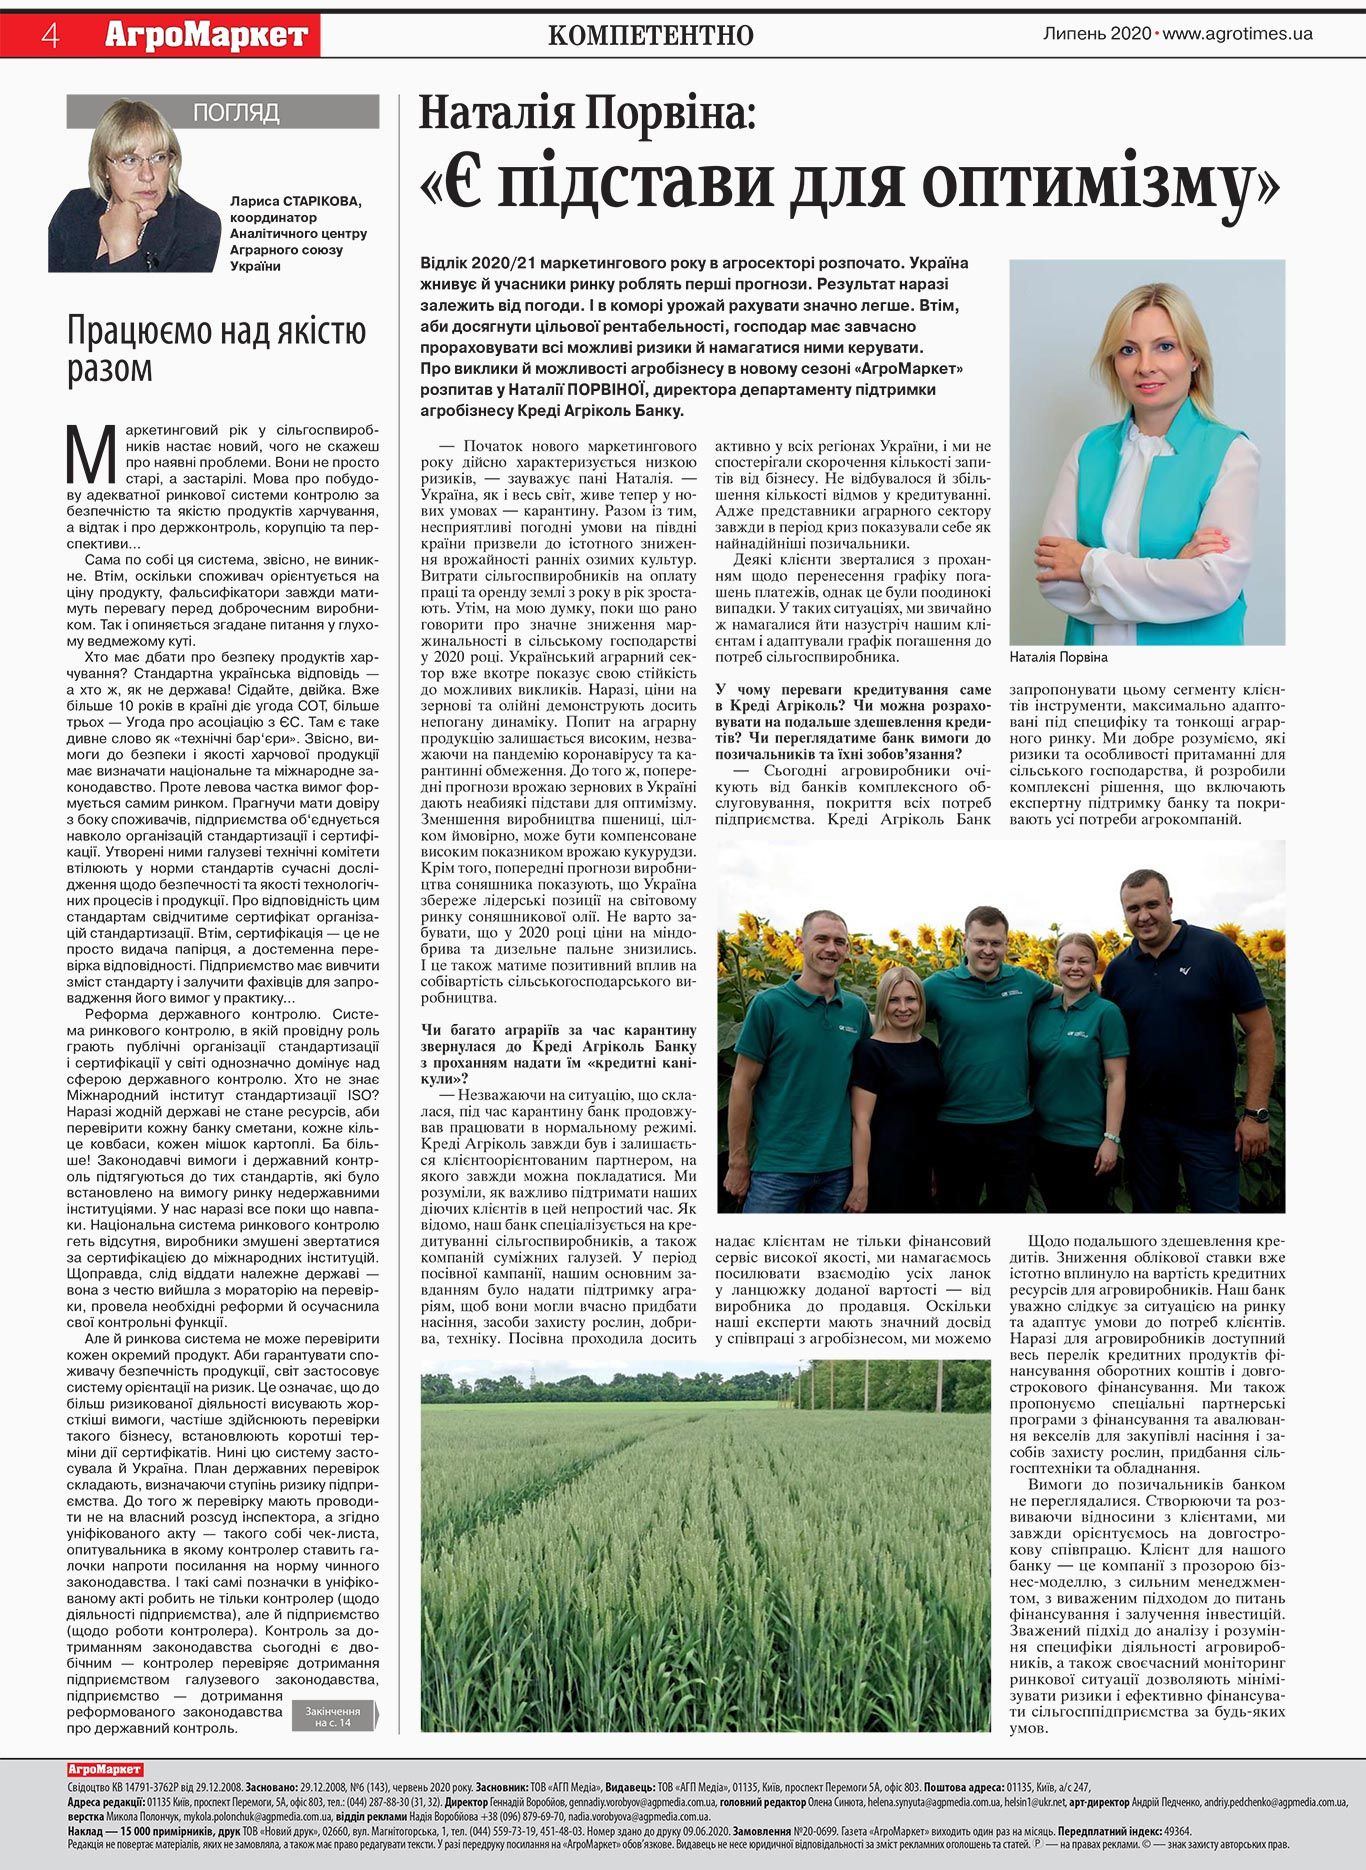 There are reasons to be optimistic. AgroTimes July 2020